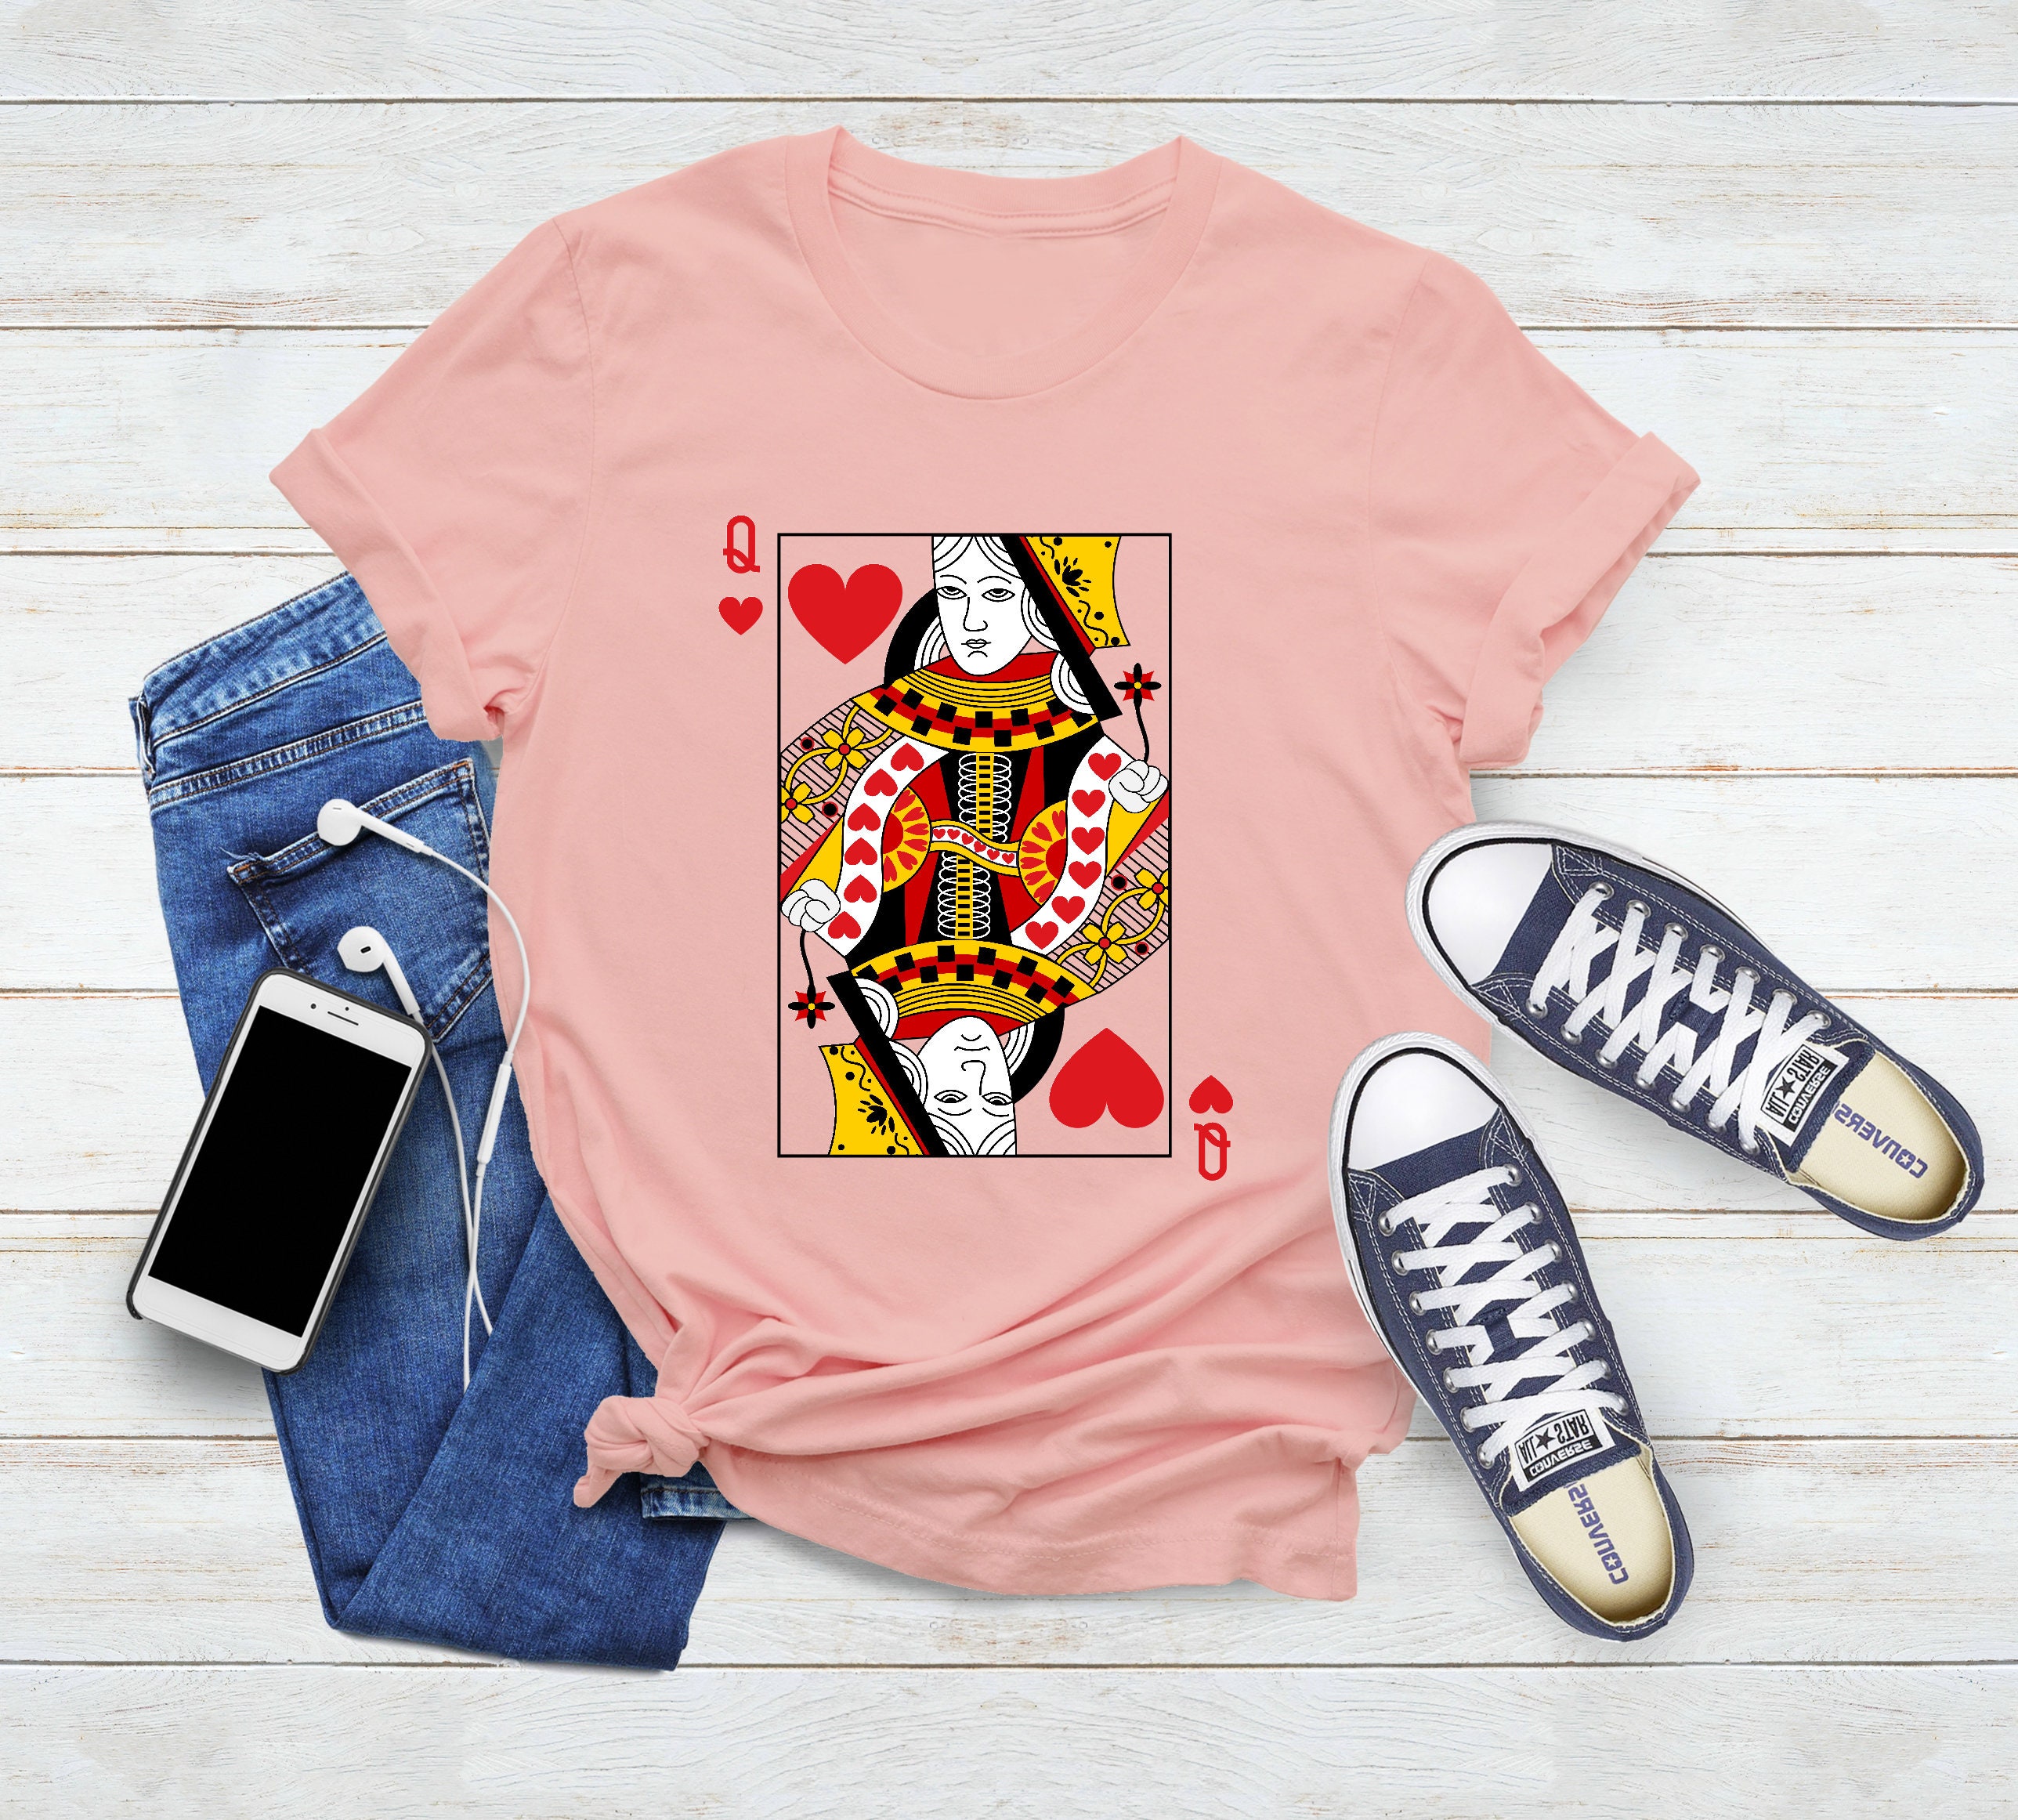 Discover Queen Of Hearts Graphic Tee, Oversized Style Women's T-Shirt